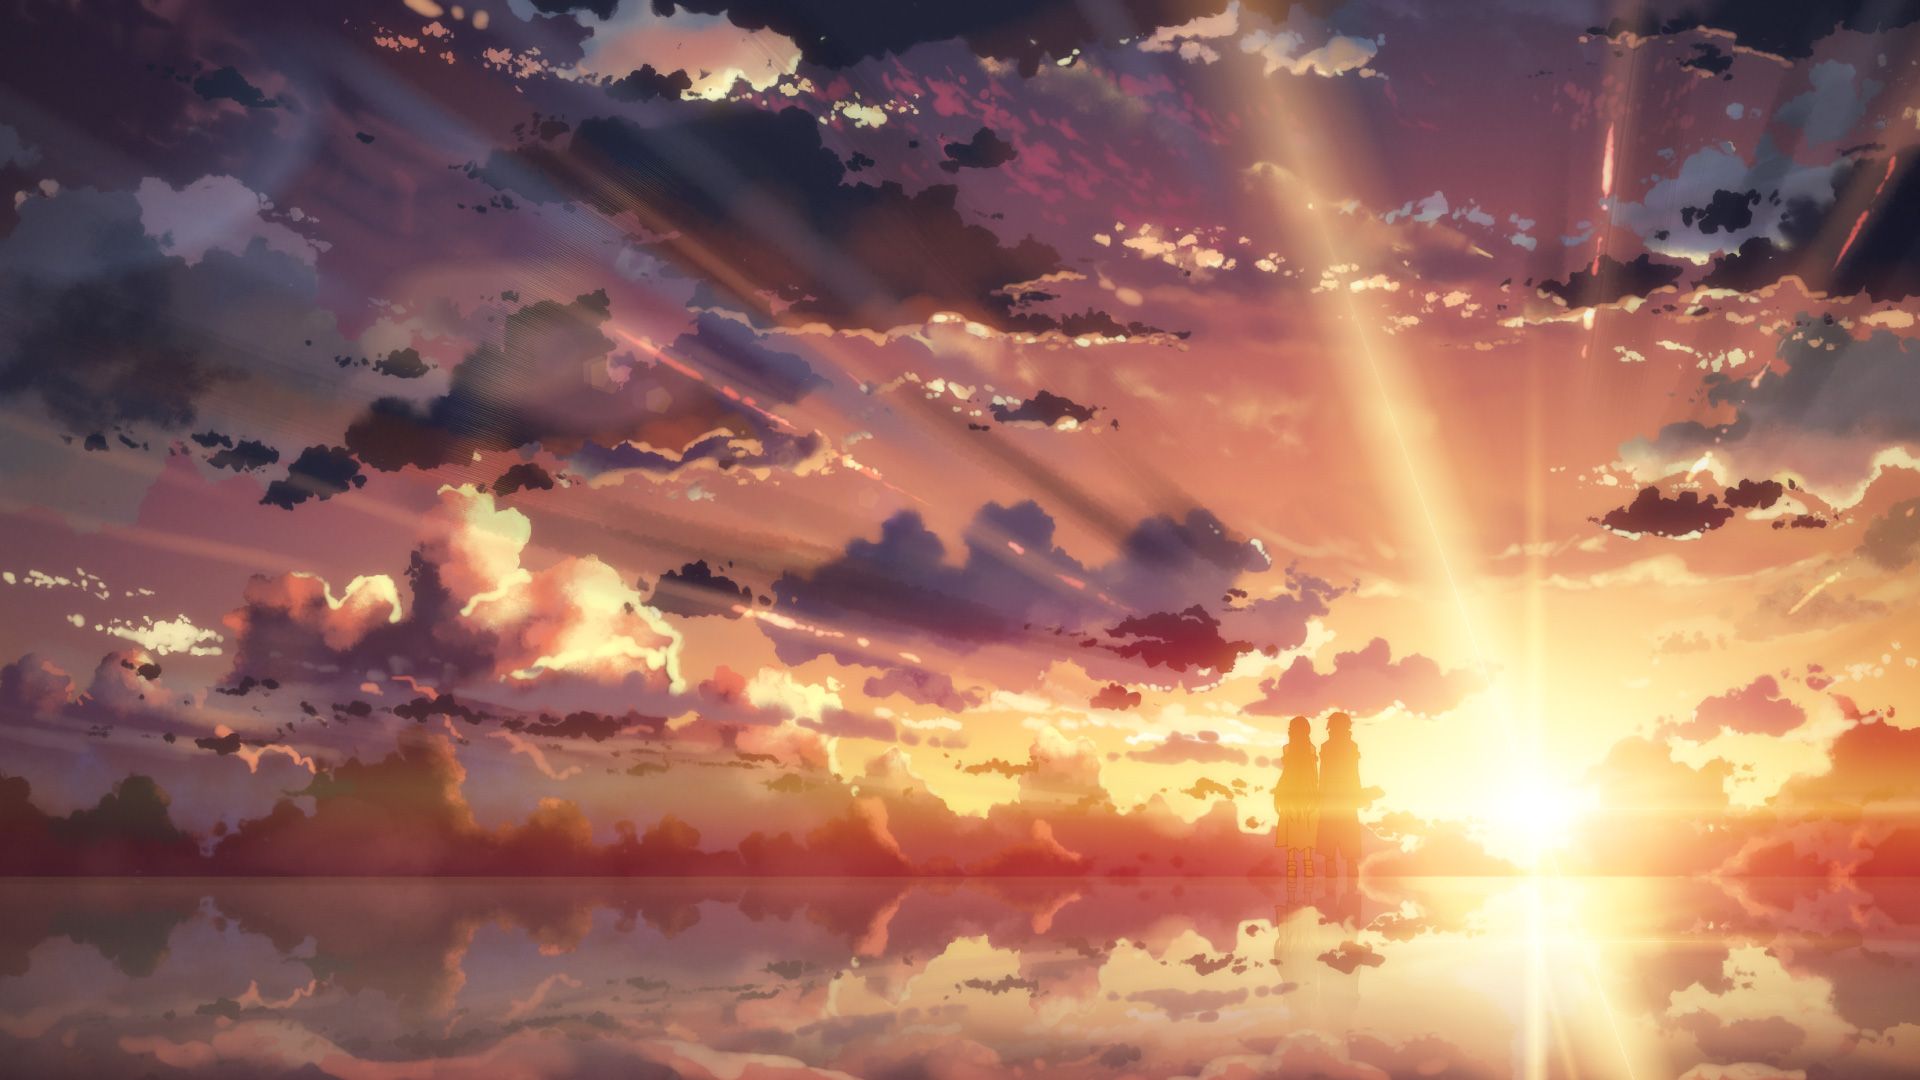 A sunset over the water with clouds in it - Anime sunset